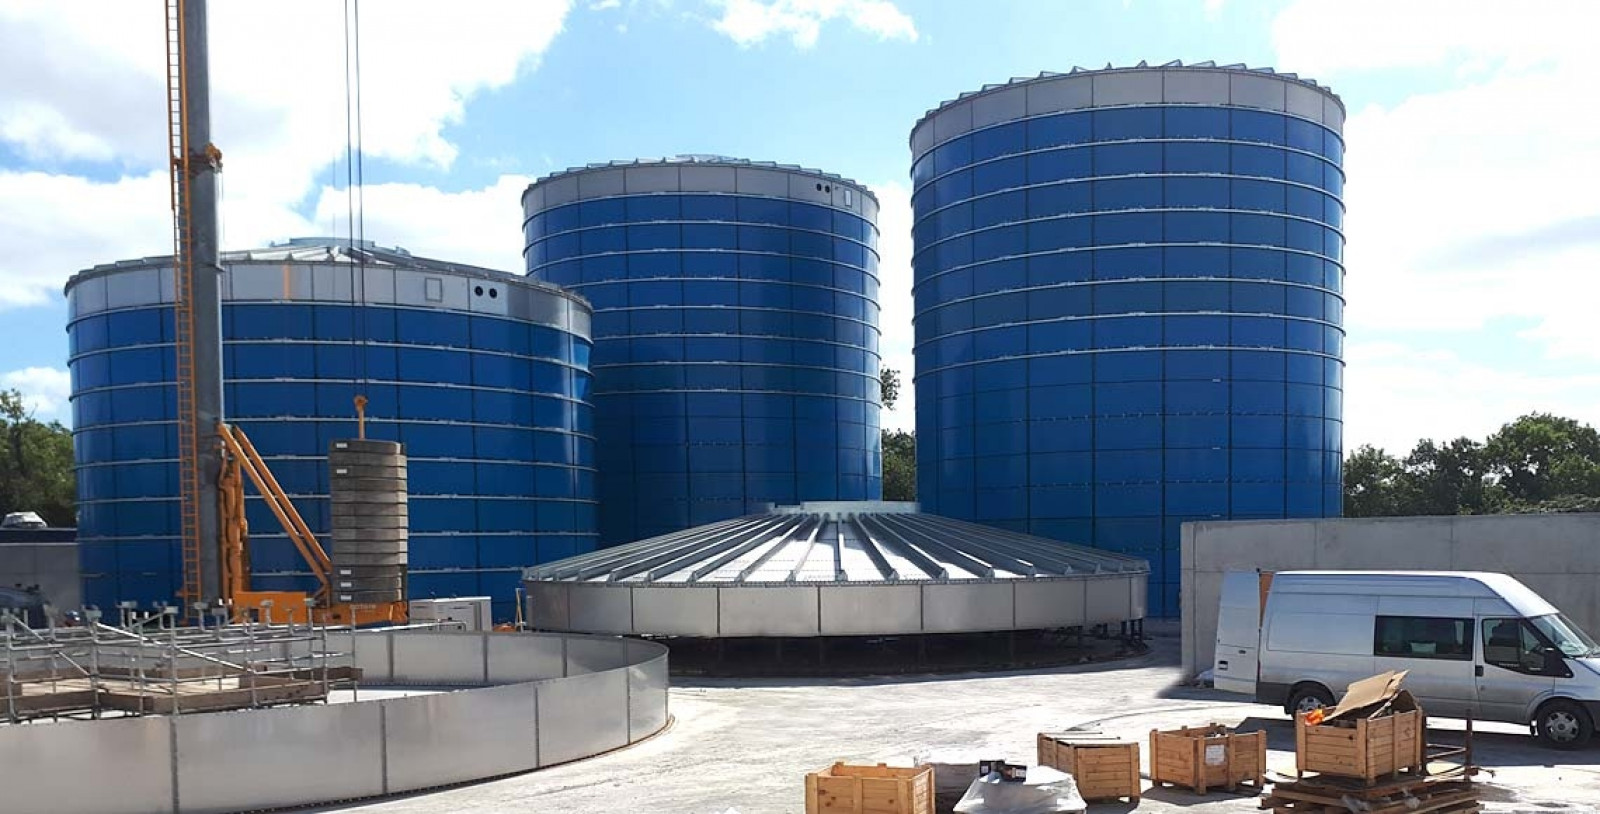 Acquisitions and restructuring broadens Balmoral Tanks scope